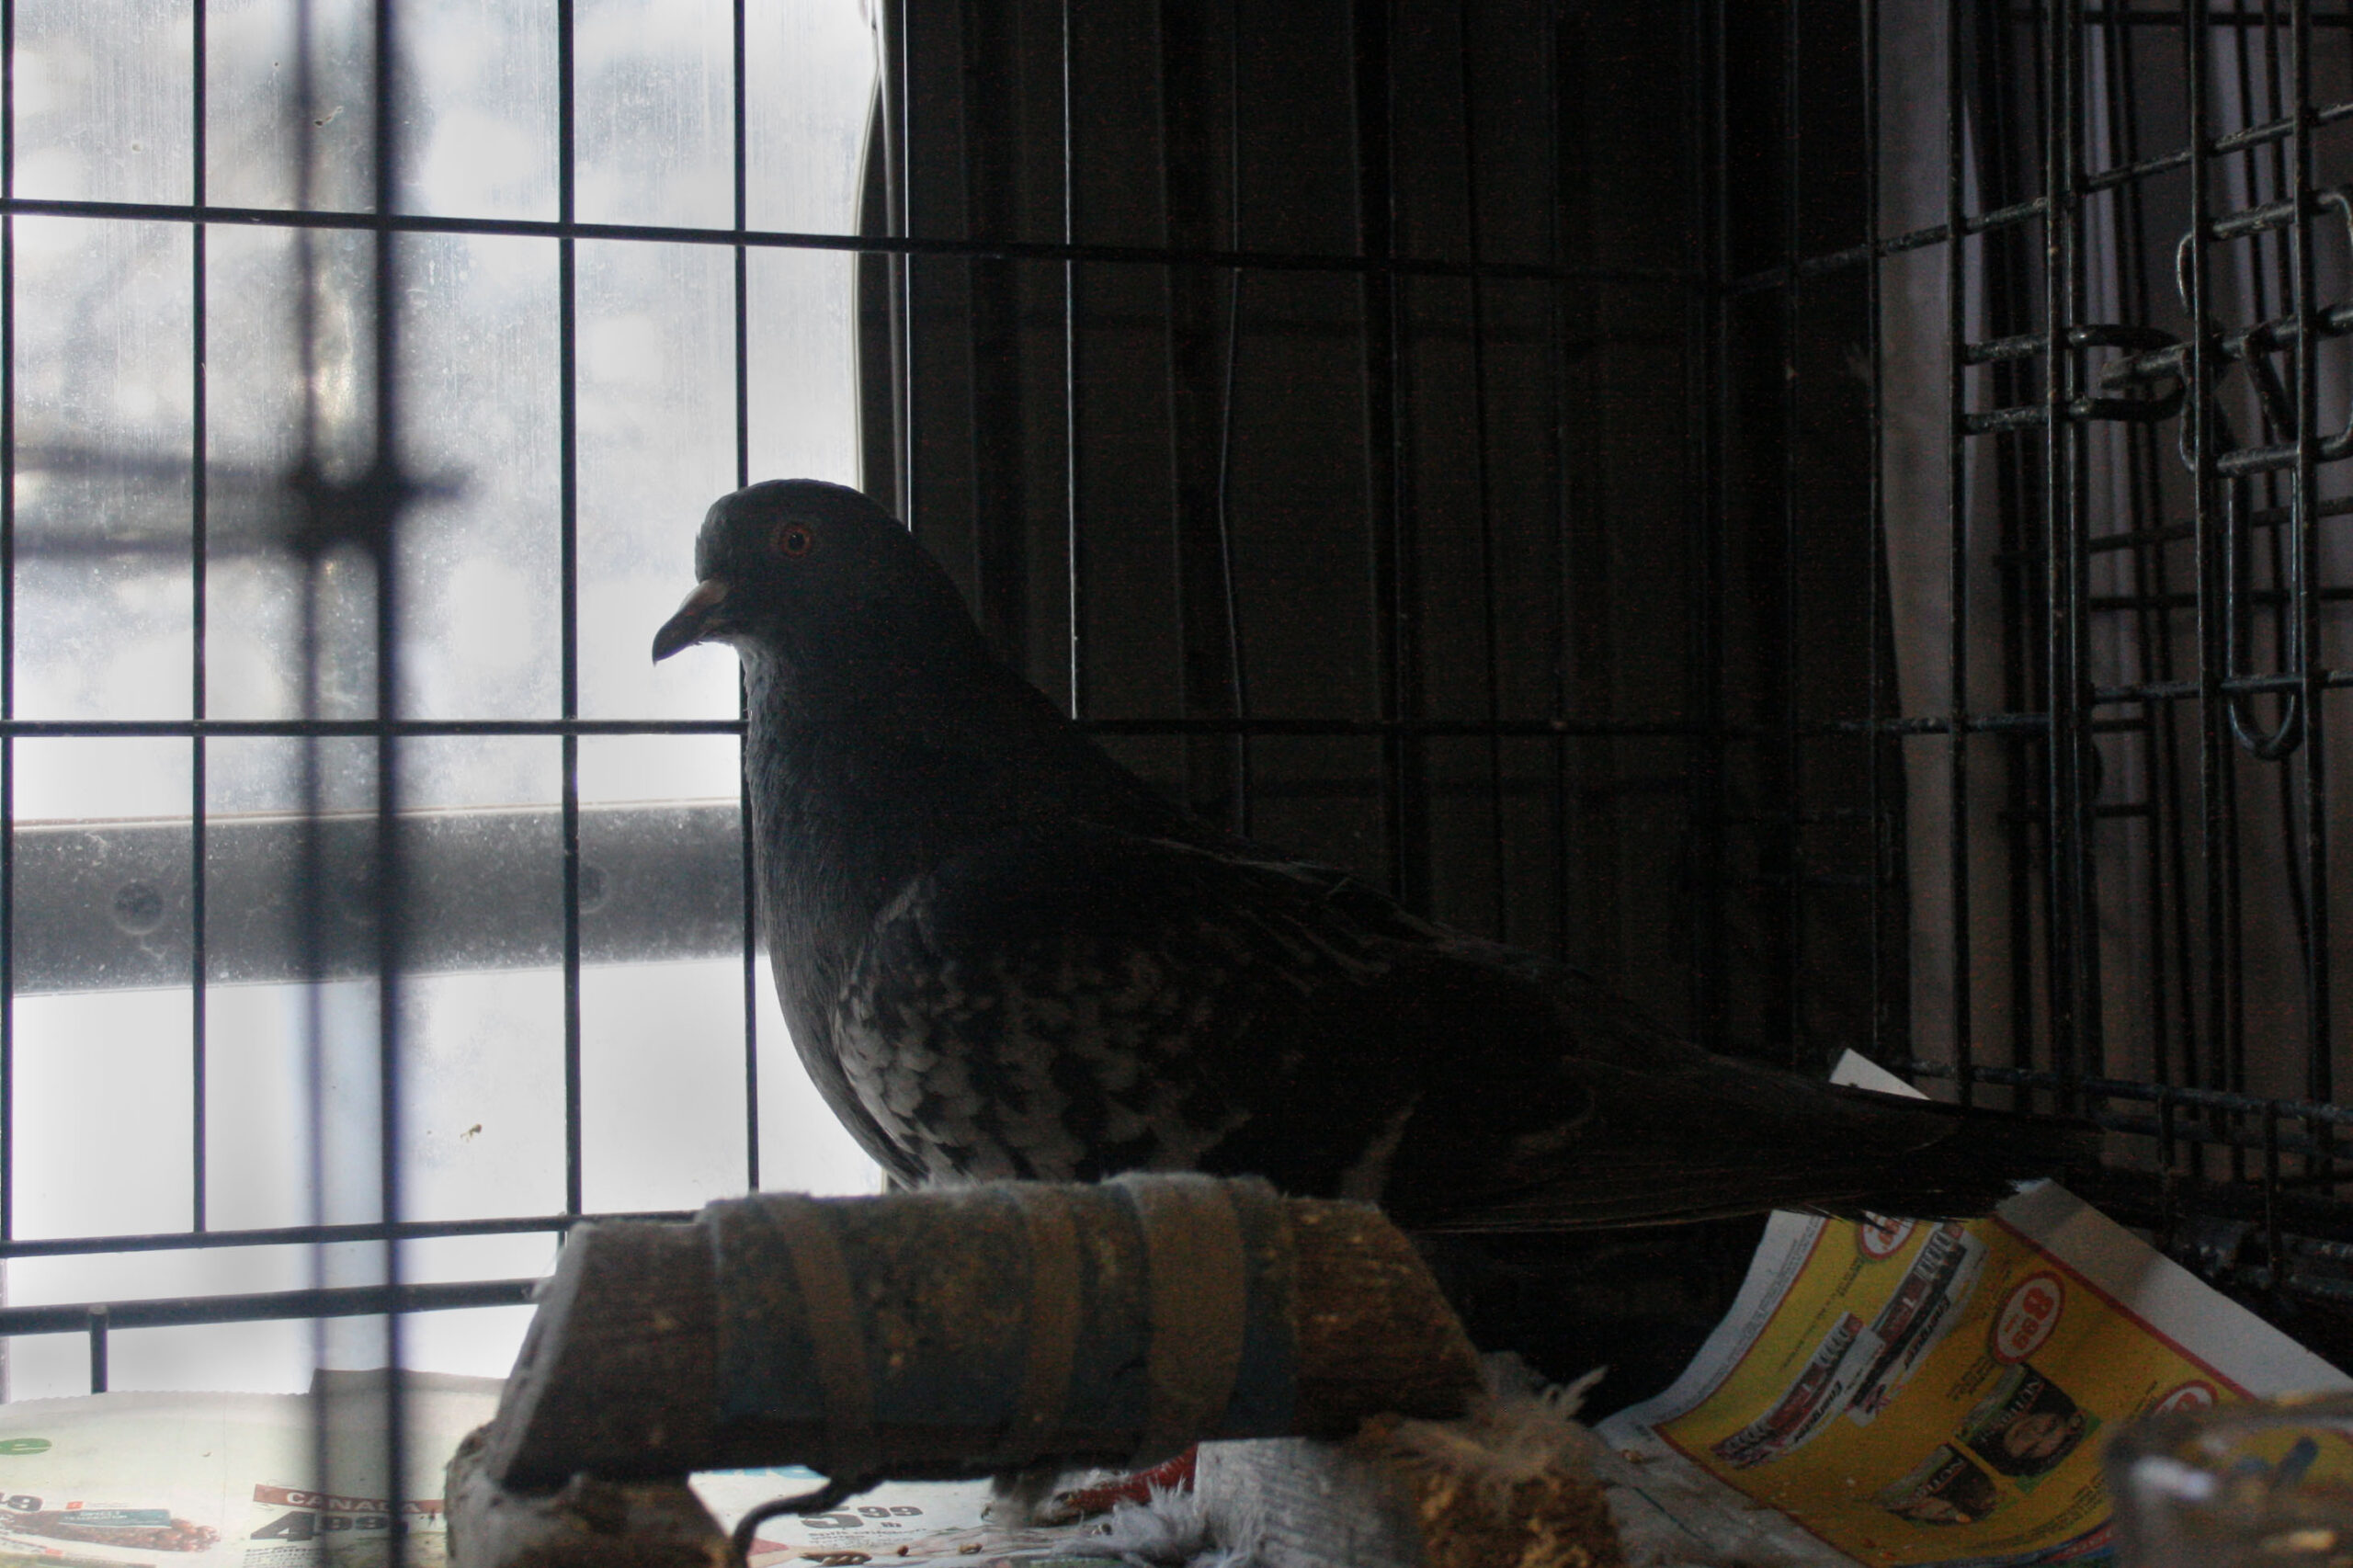 A pigeon that has had its feathers cleaned of oil recuperates in a cage.